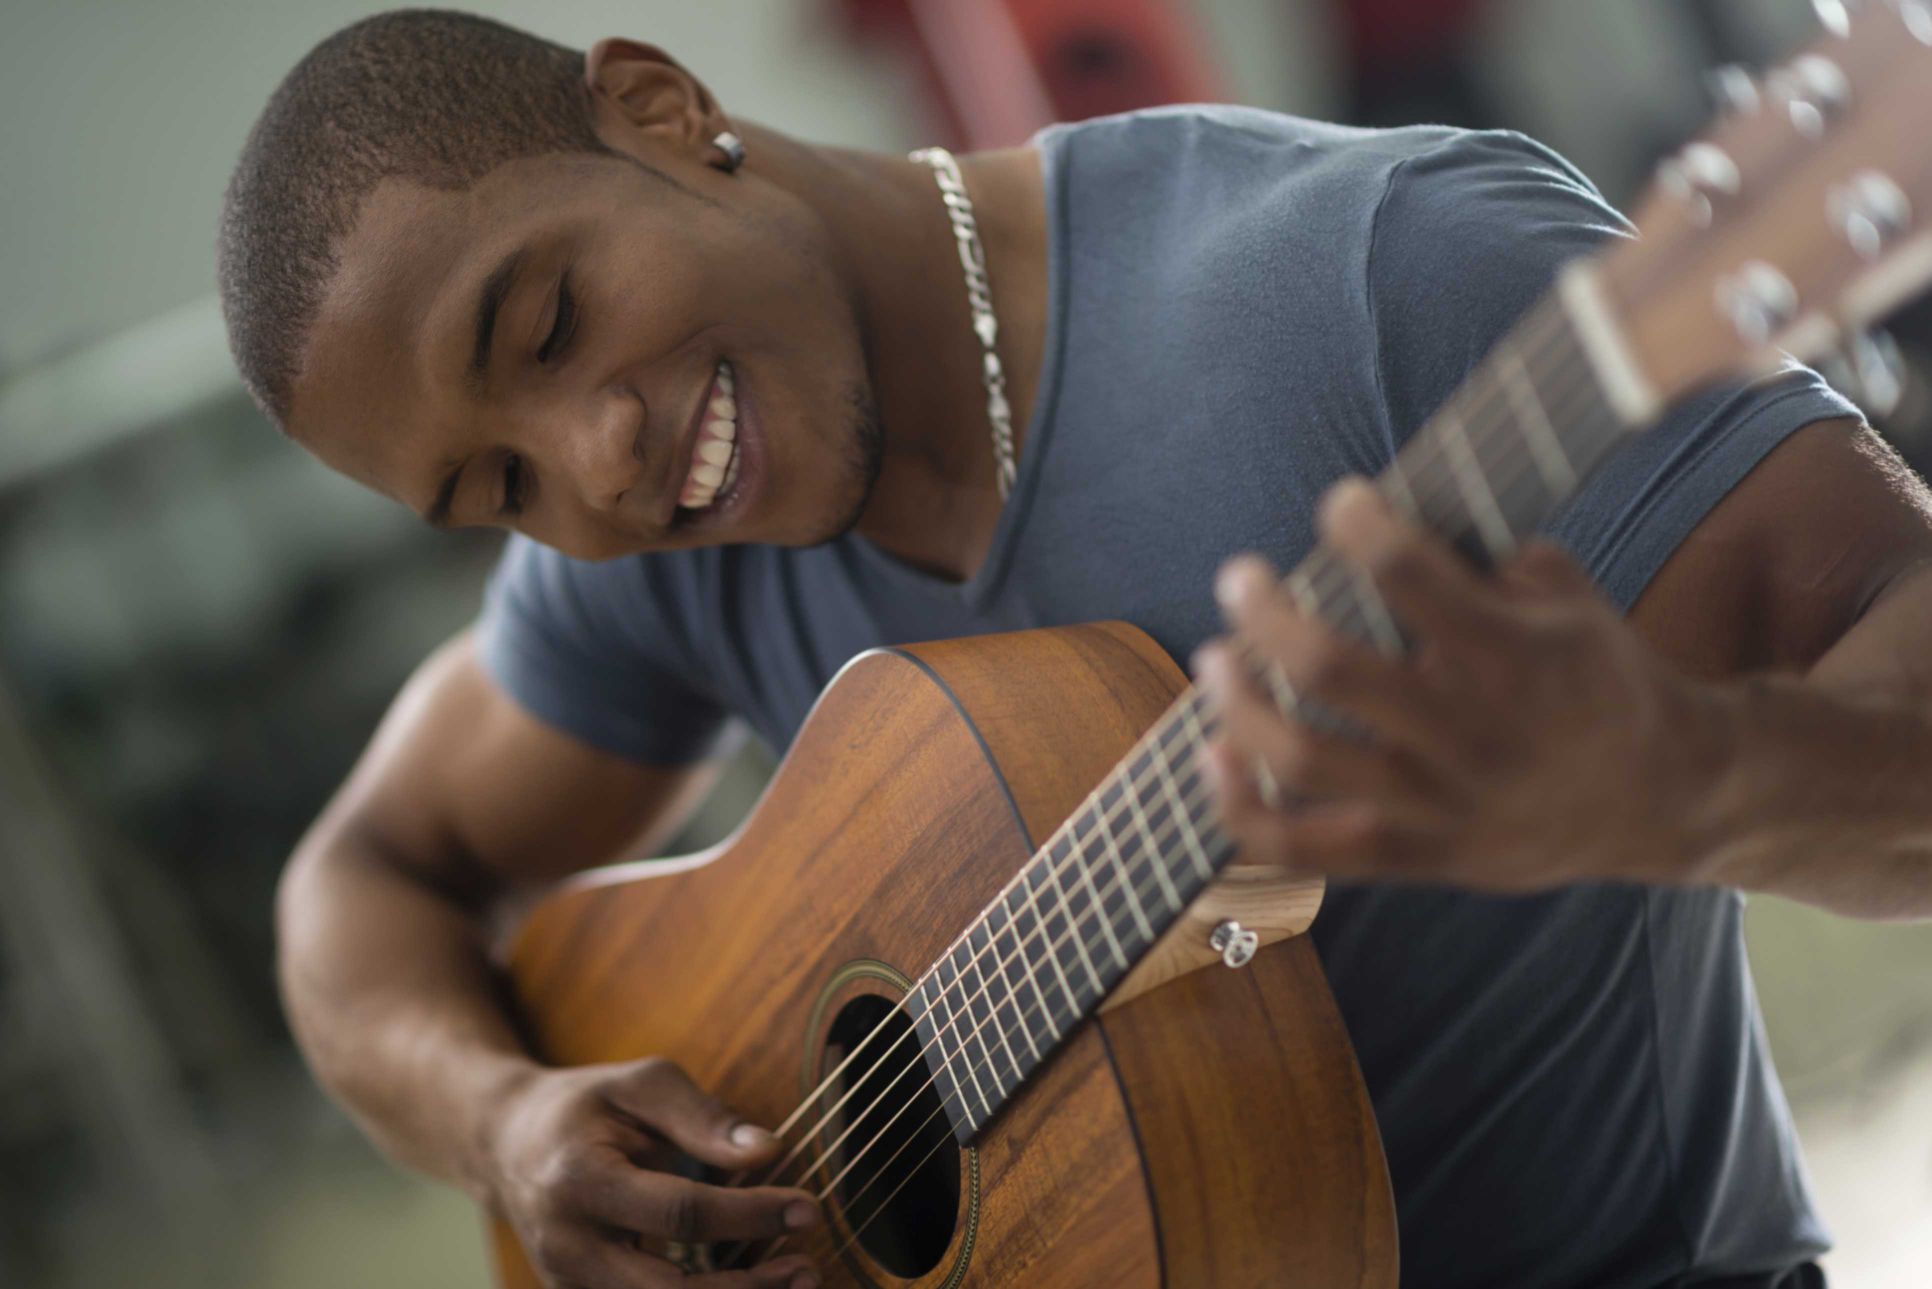 A young man plays a musical instrument, which improves his brain’s ability.